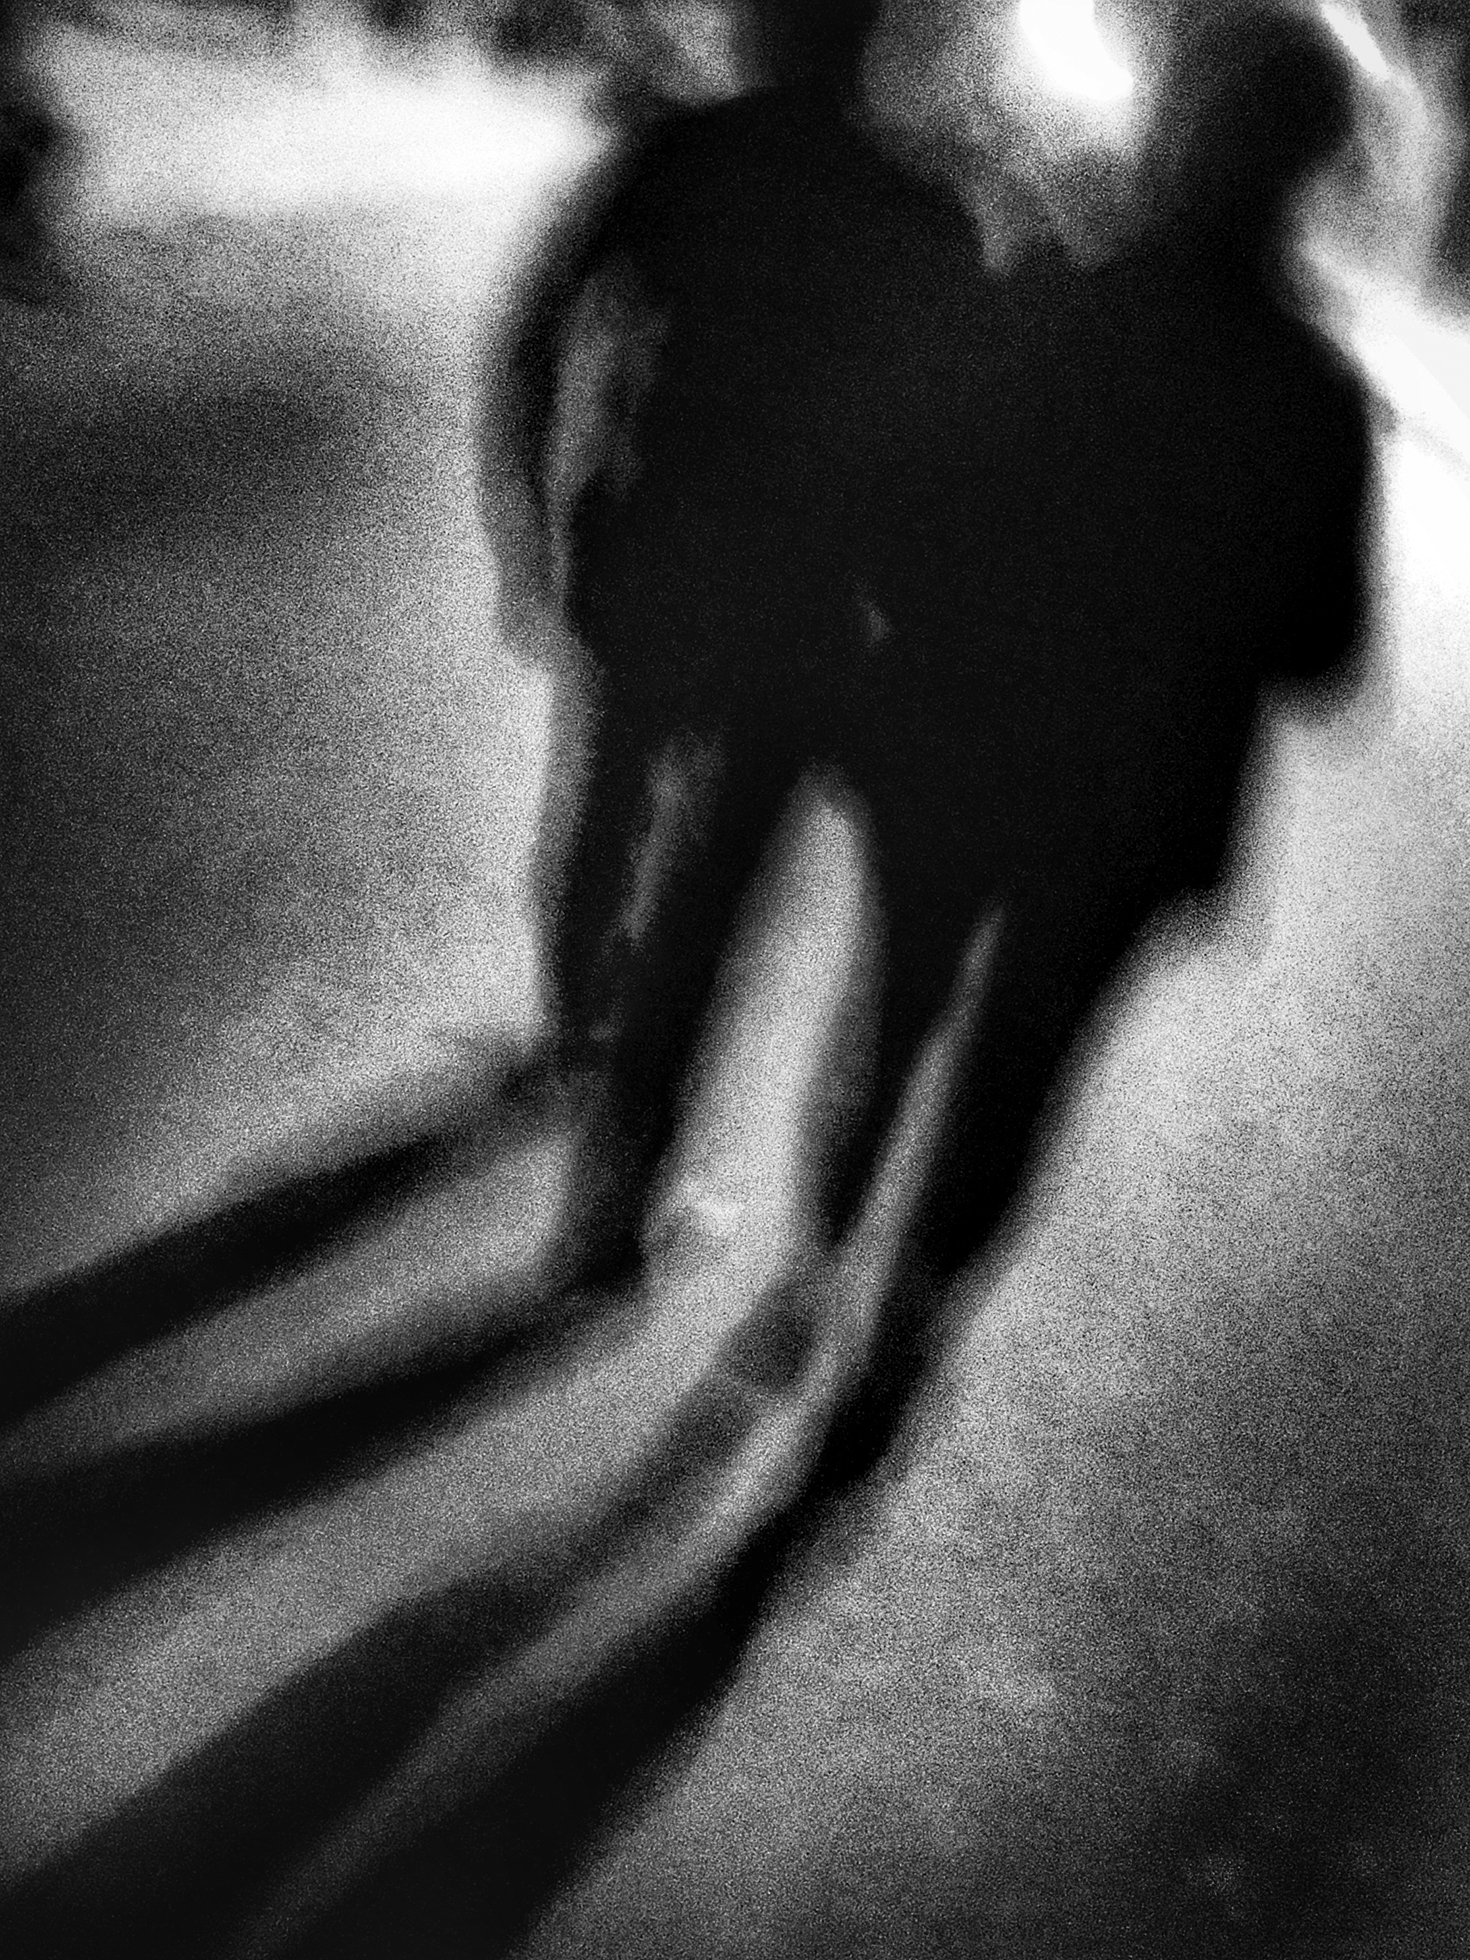 Two blurred, dark figures surrounded by light walk away toward a circular light leaving long shadows behind.